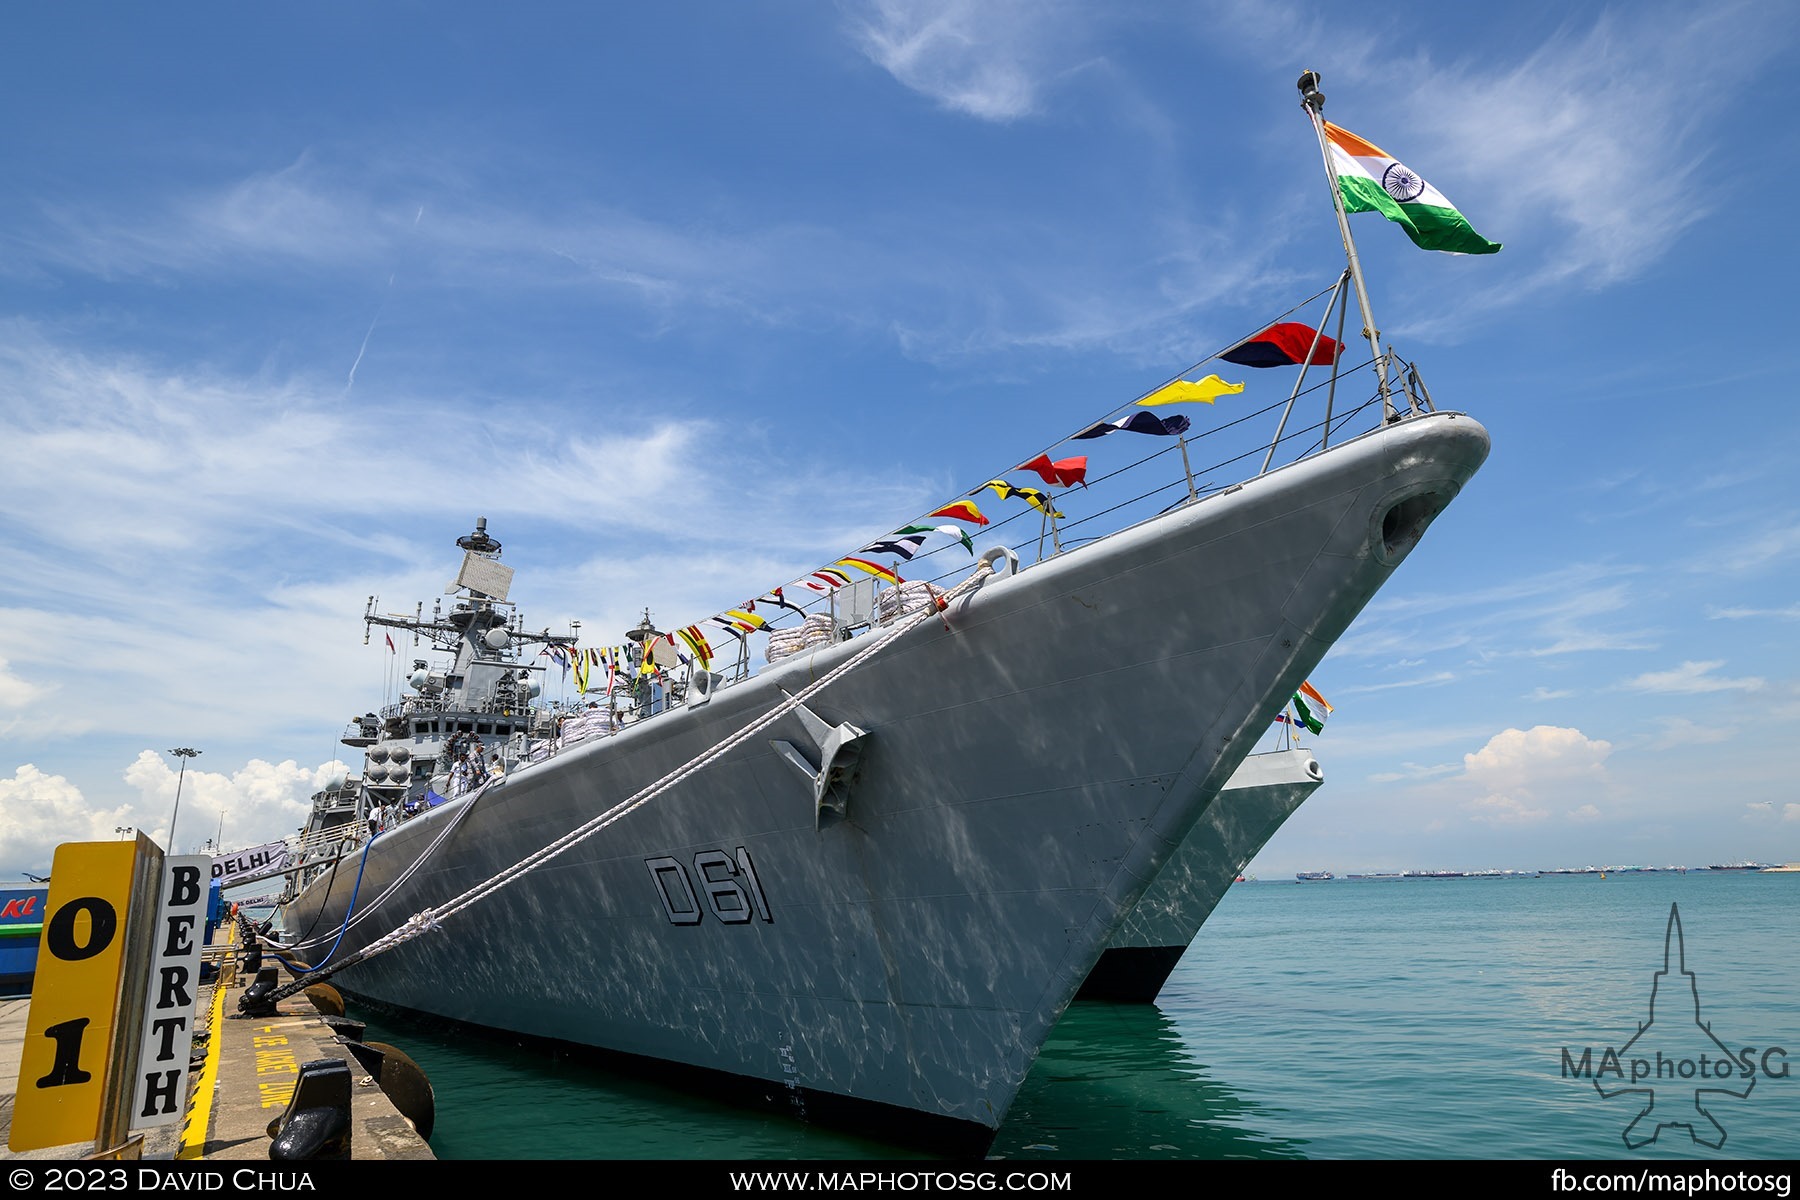 INS Delhi (D61). She is the lead ship of her class of guided-missile destroyers of the Indian Navy